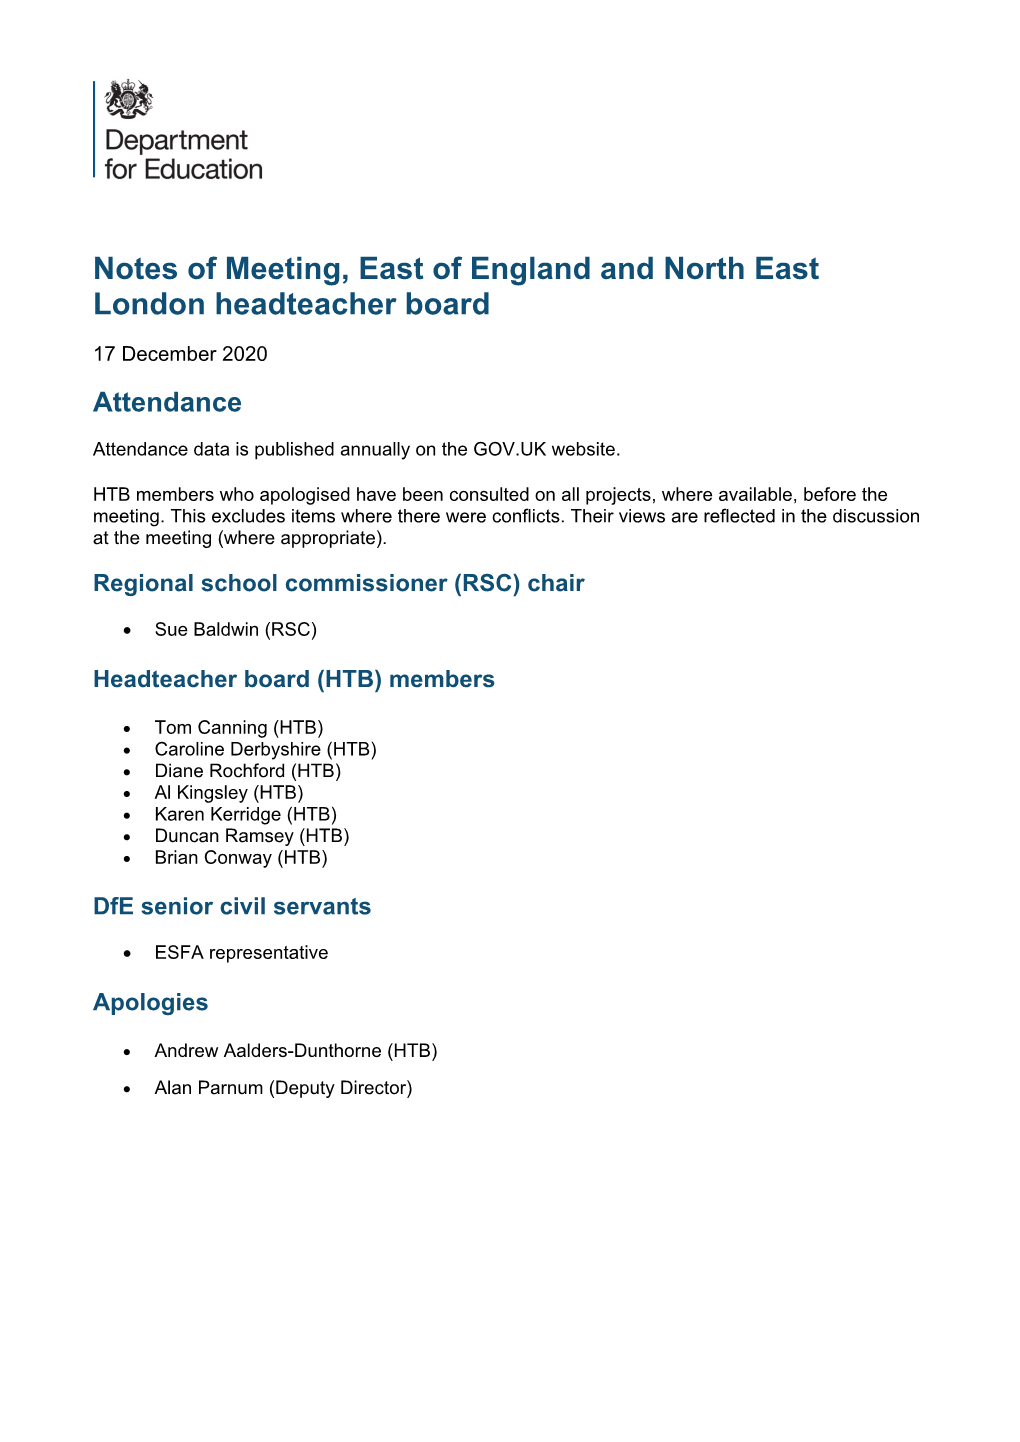 Notes of Meeting, East of England and North East London Headteacher Board